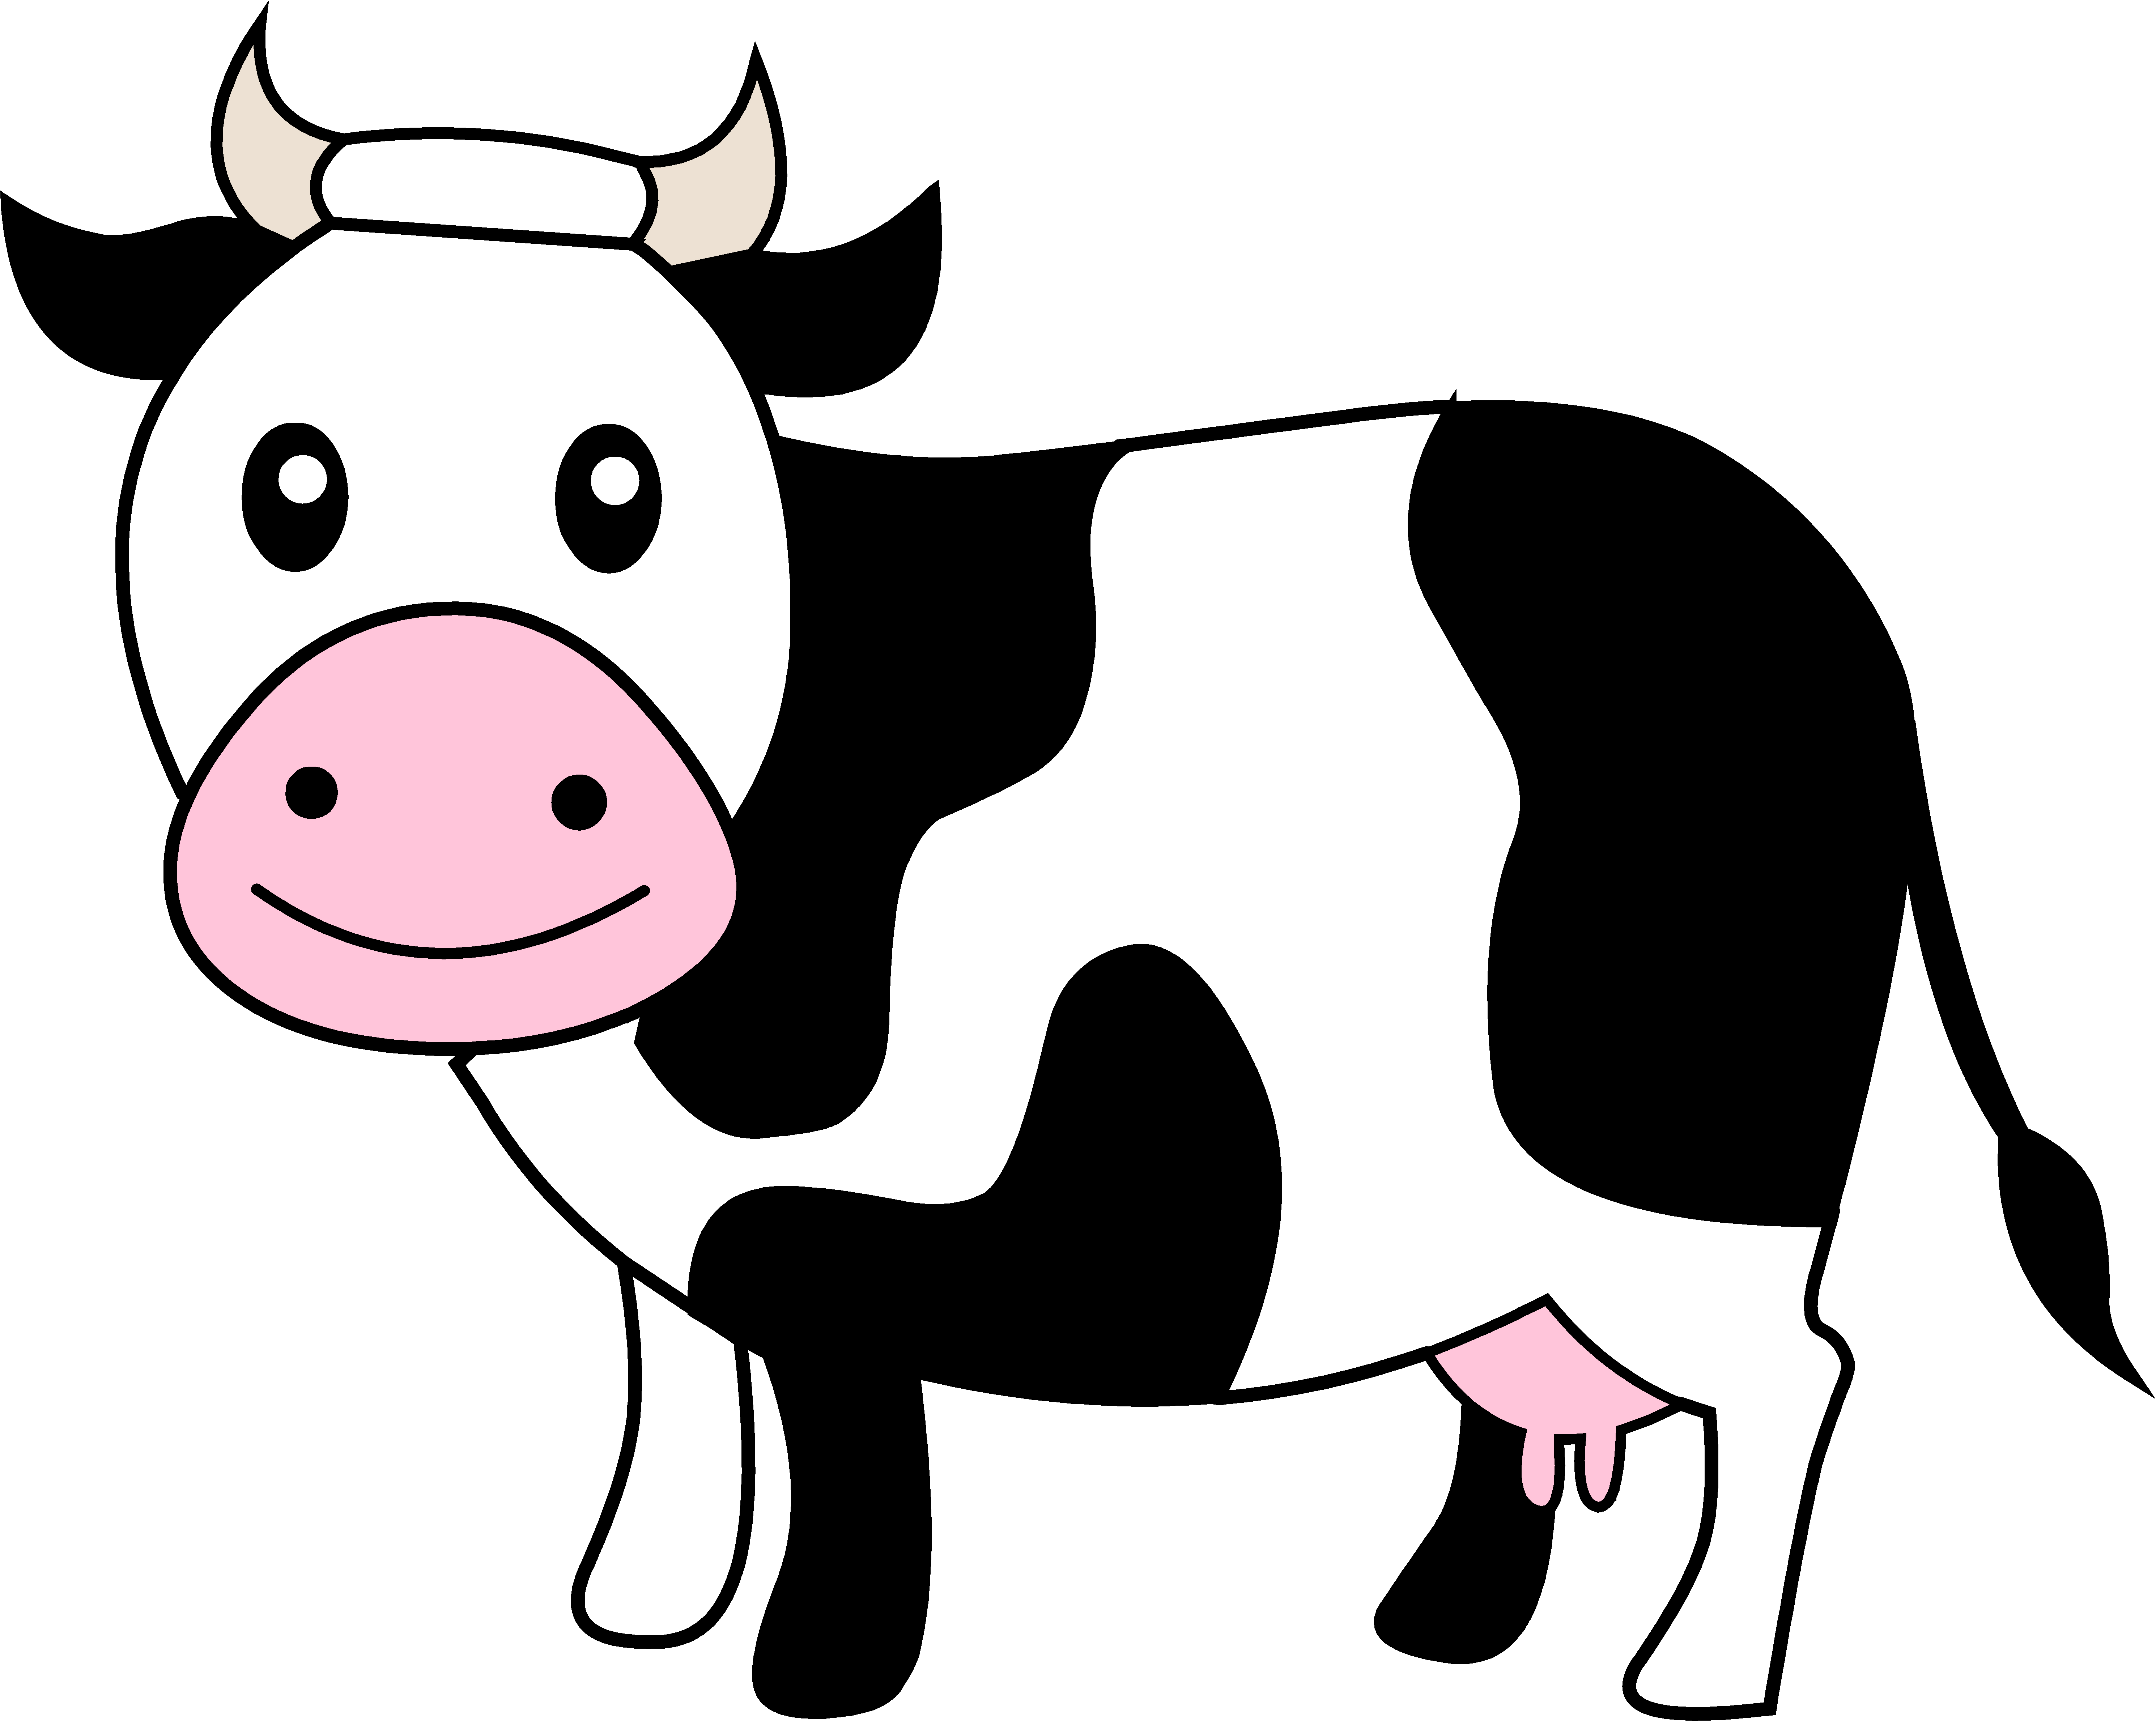 Cow clip art embroidery. Working clipart paired